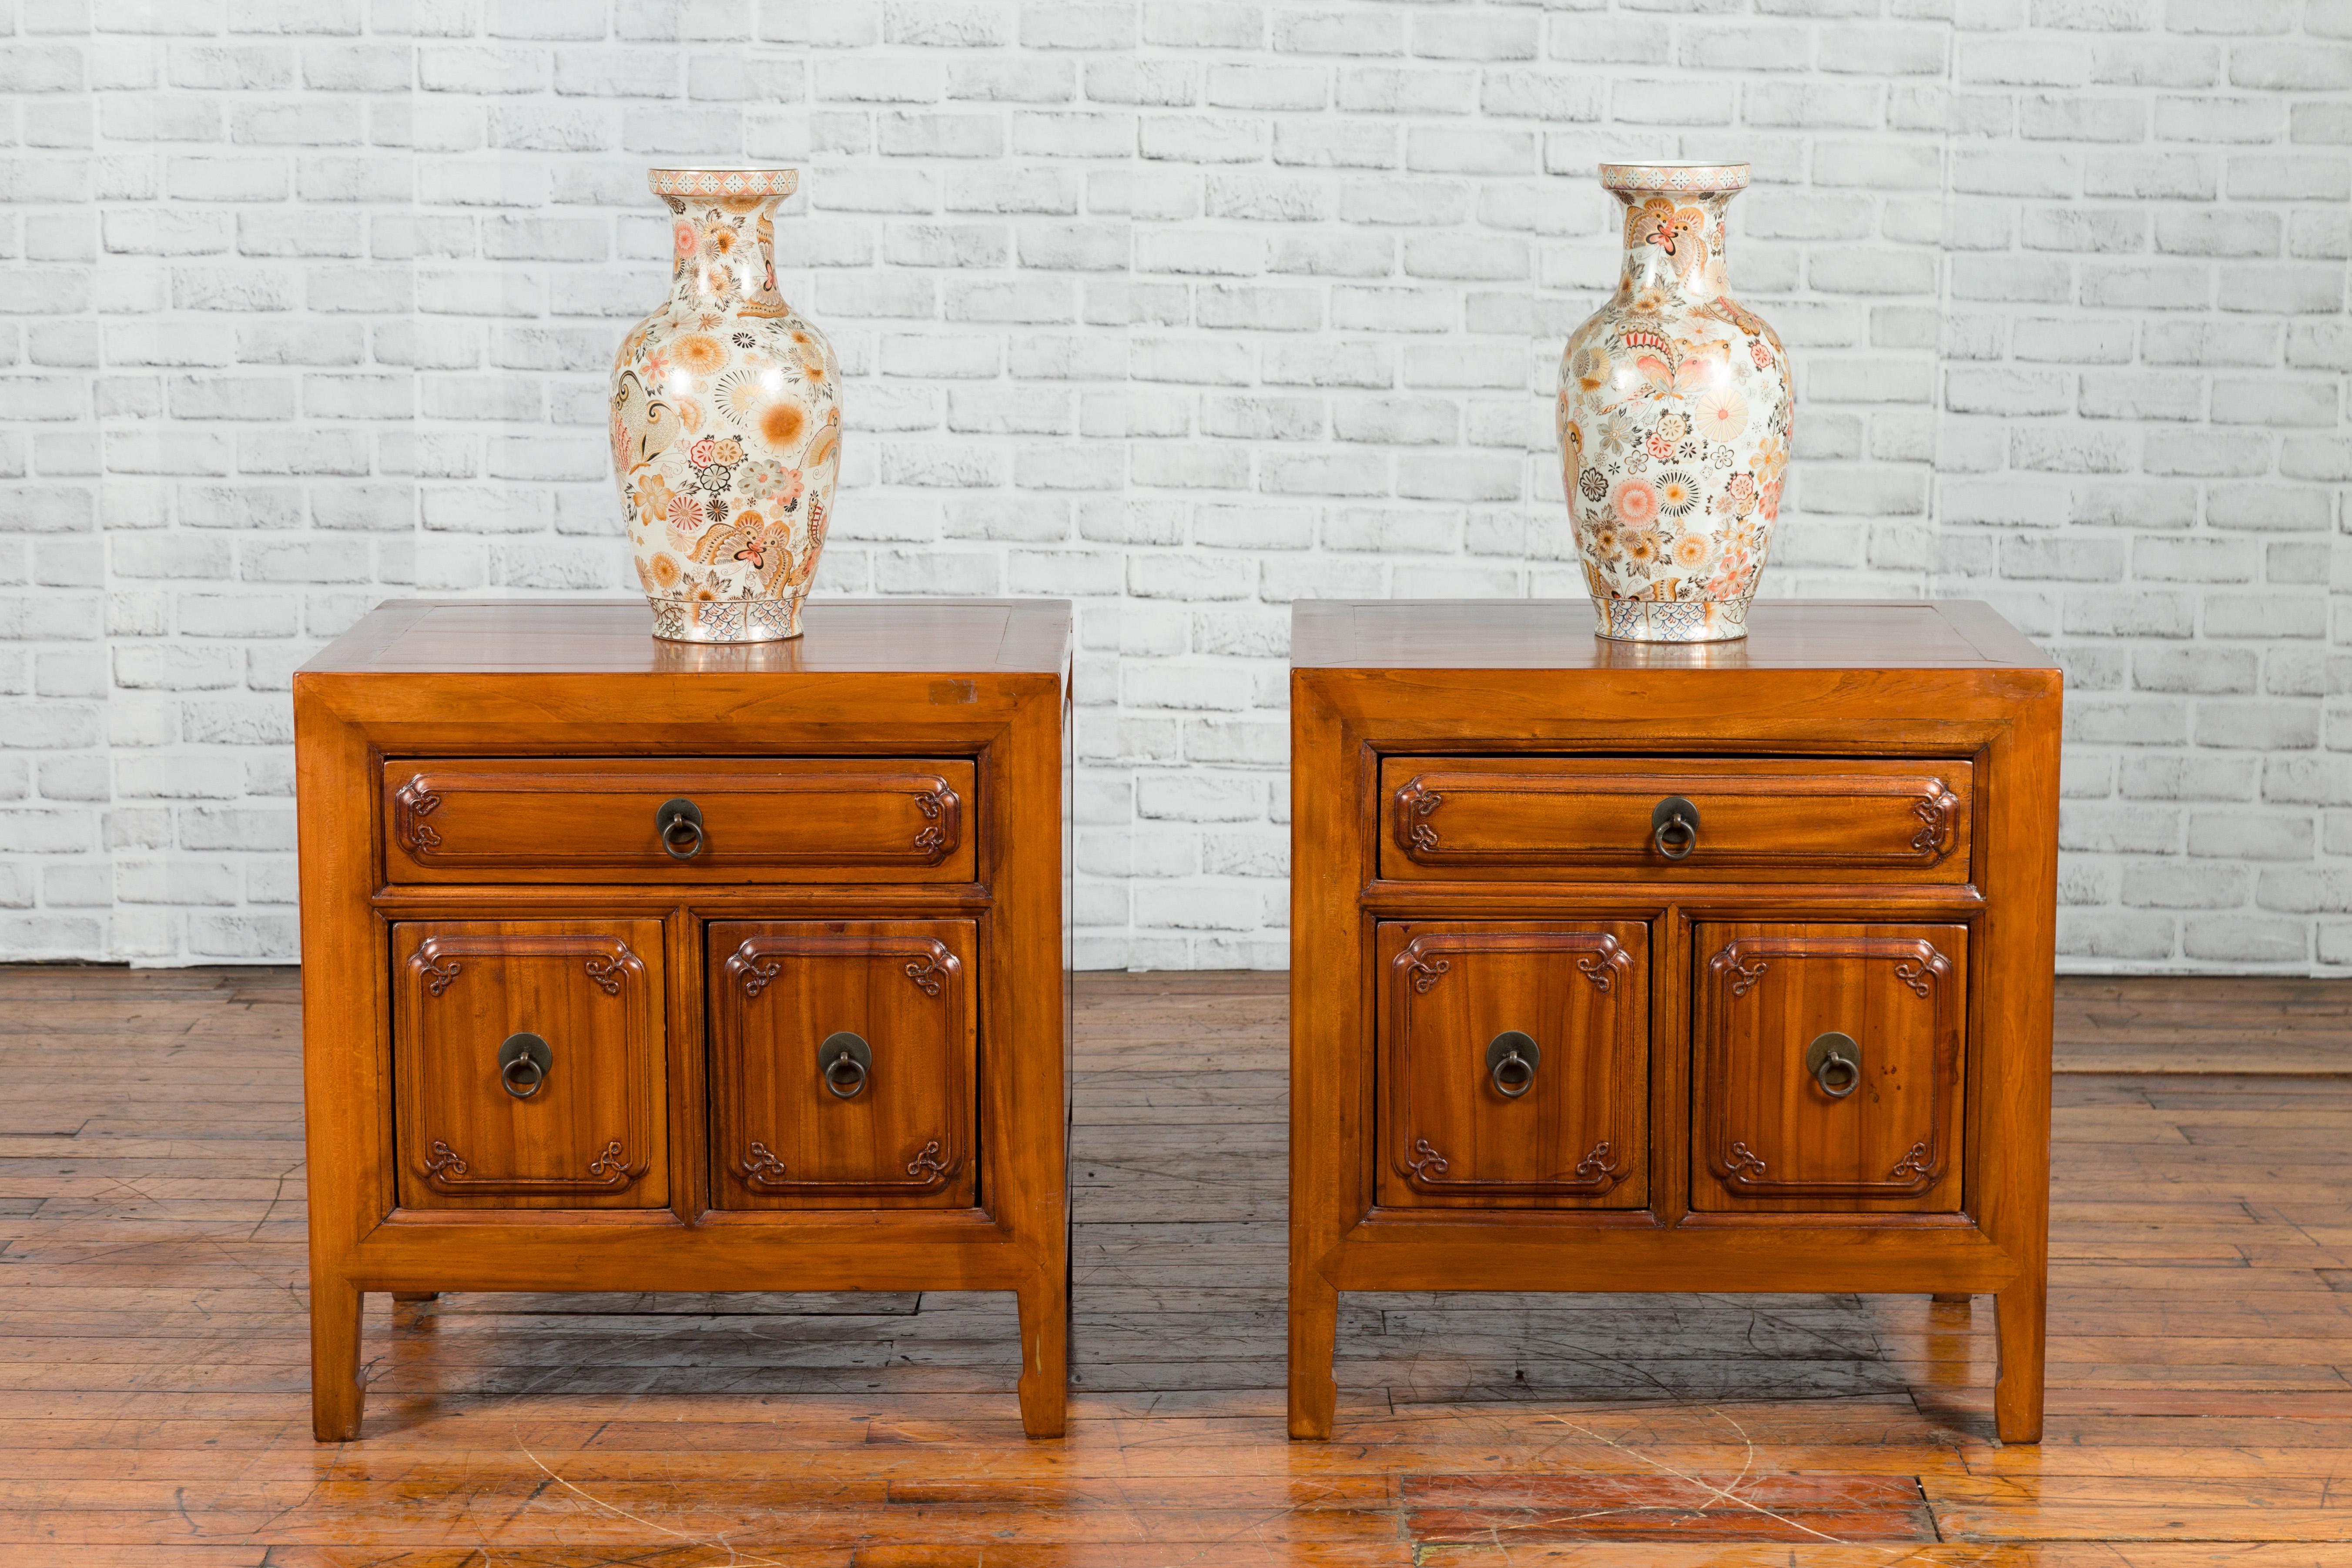 A pair of Chinese Qing dynasty period natural elm low cabinets from the 19th century, with three drawers and carved motifs. Created in China during the Qing dynasty, each of this pair of low cabinets features a square top sitting above a perfectly